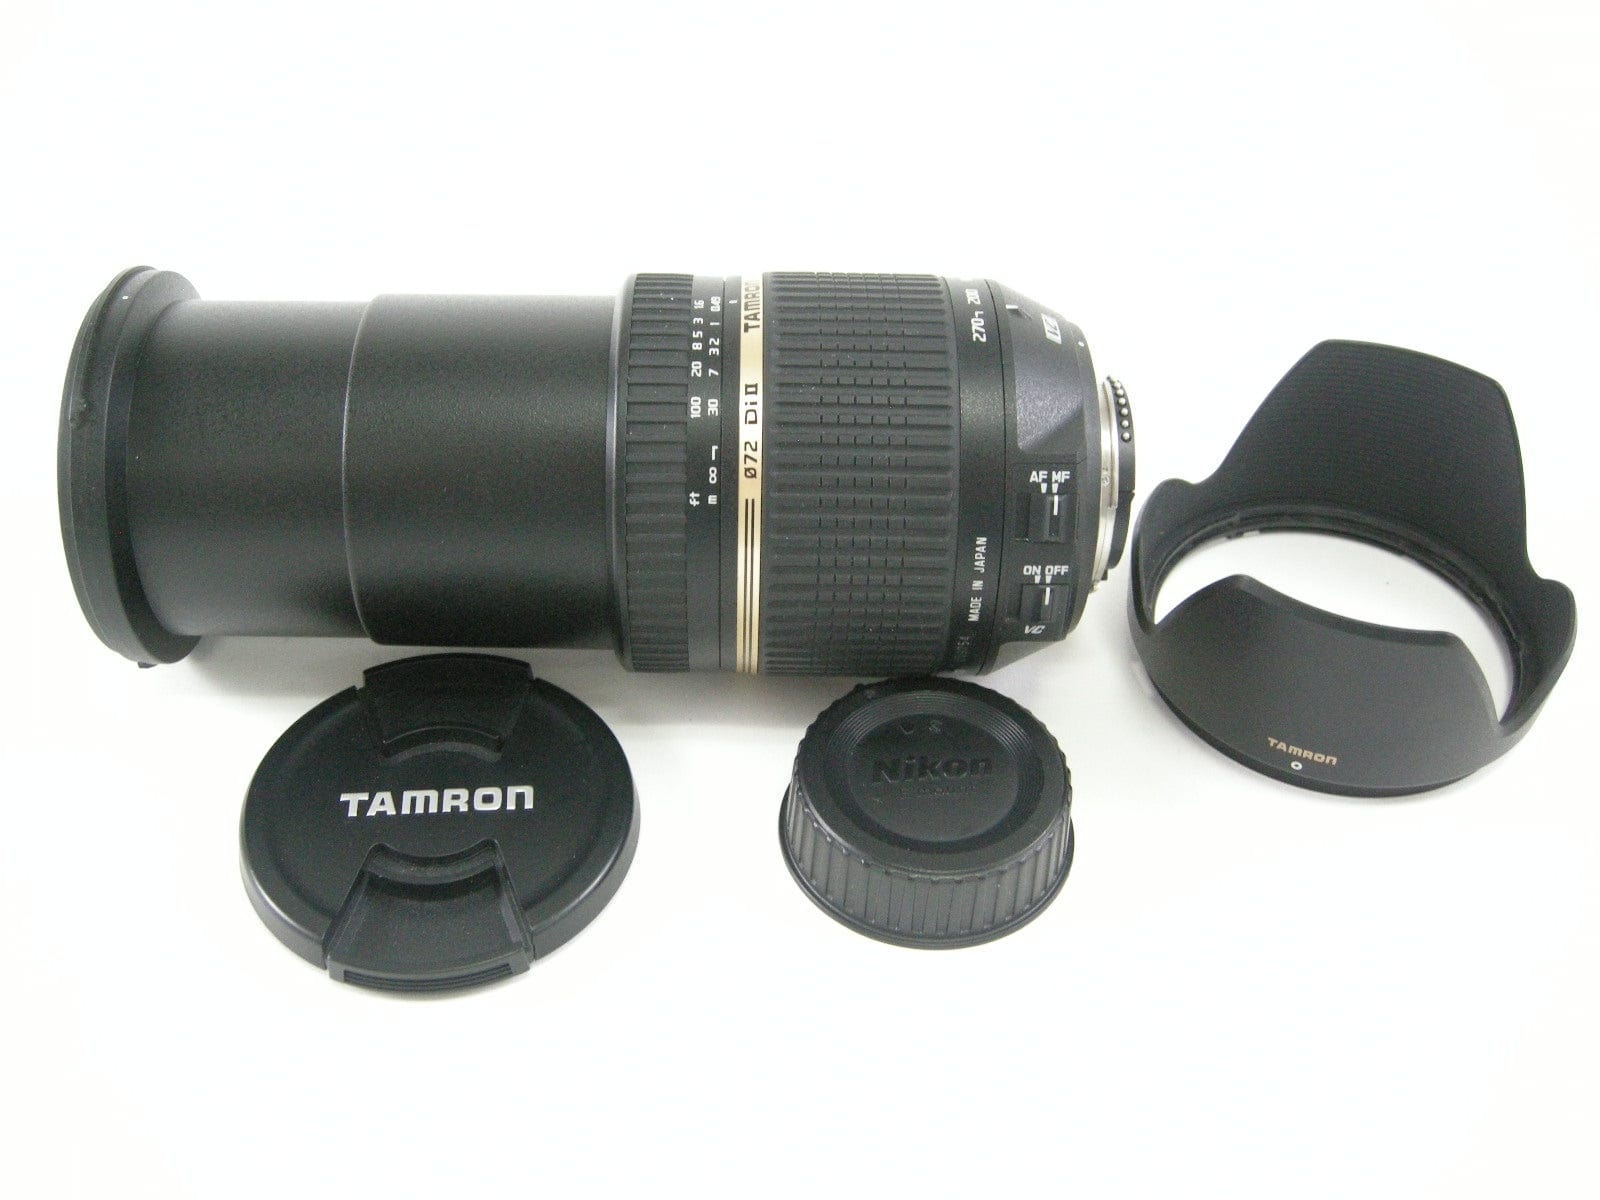 Tamron Di II VC B003 18-270mm f3.5-6.3 Nikon F *PARTS ONLY/AS IS*